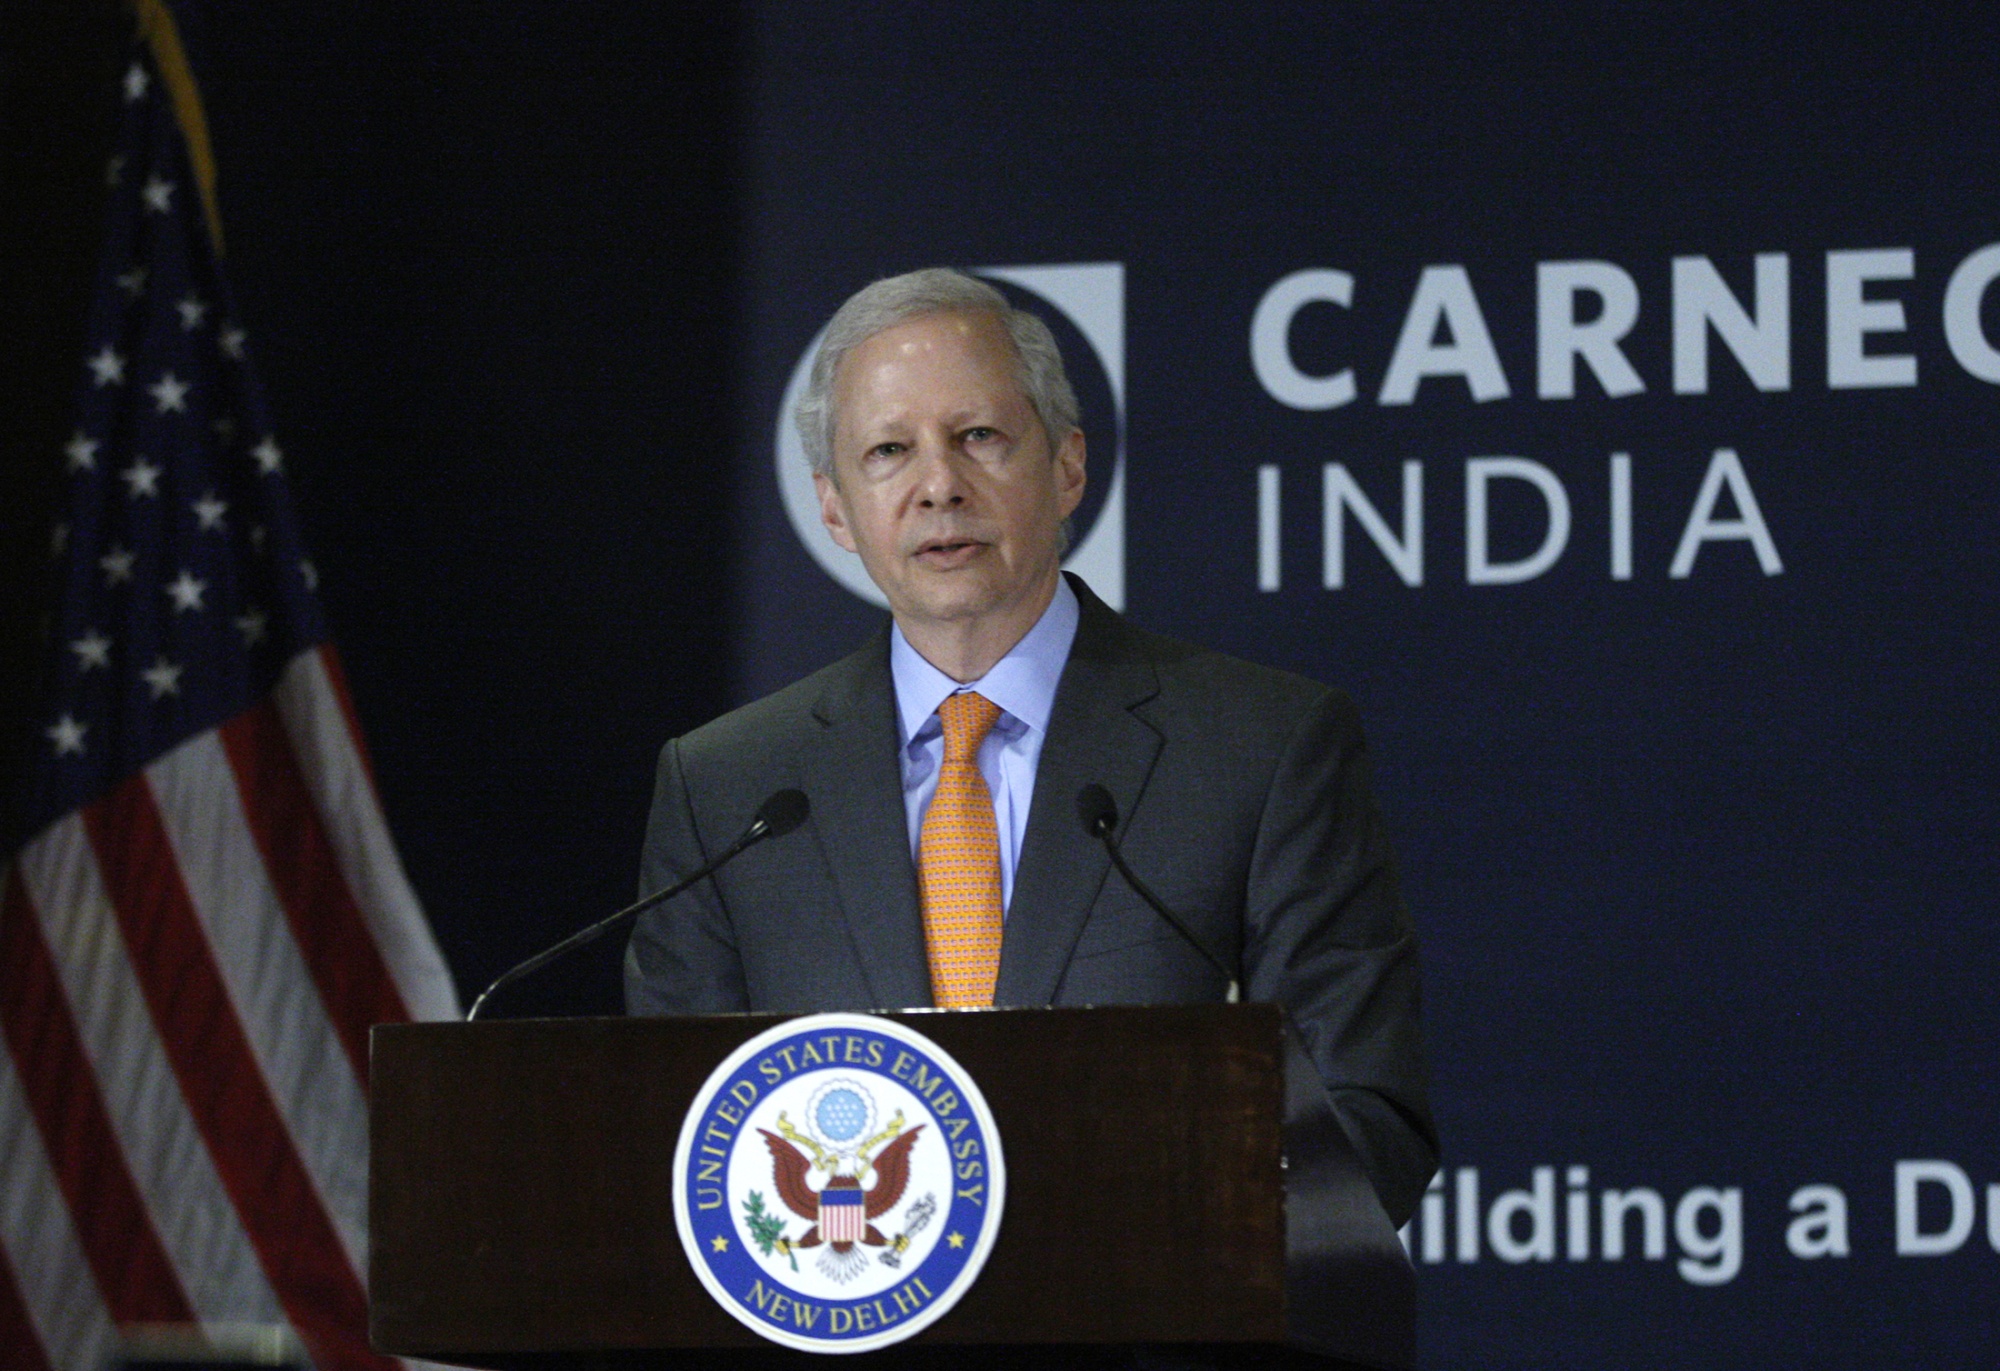 Kenneth Juster said that friction between the two nations on trade and investments led to a stalled trade deal with the outgoing Trump administration.